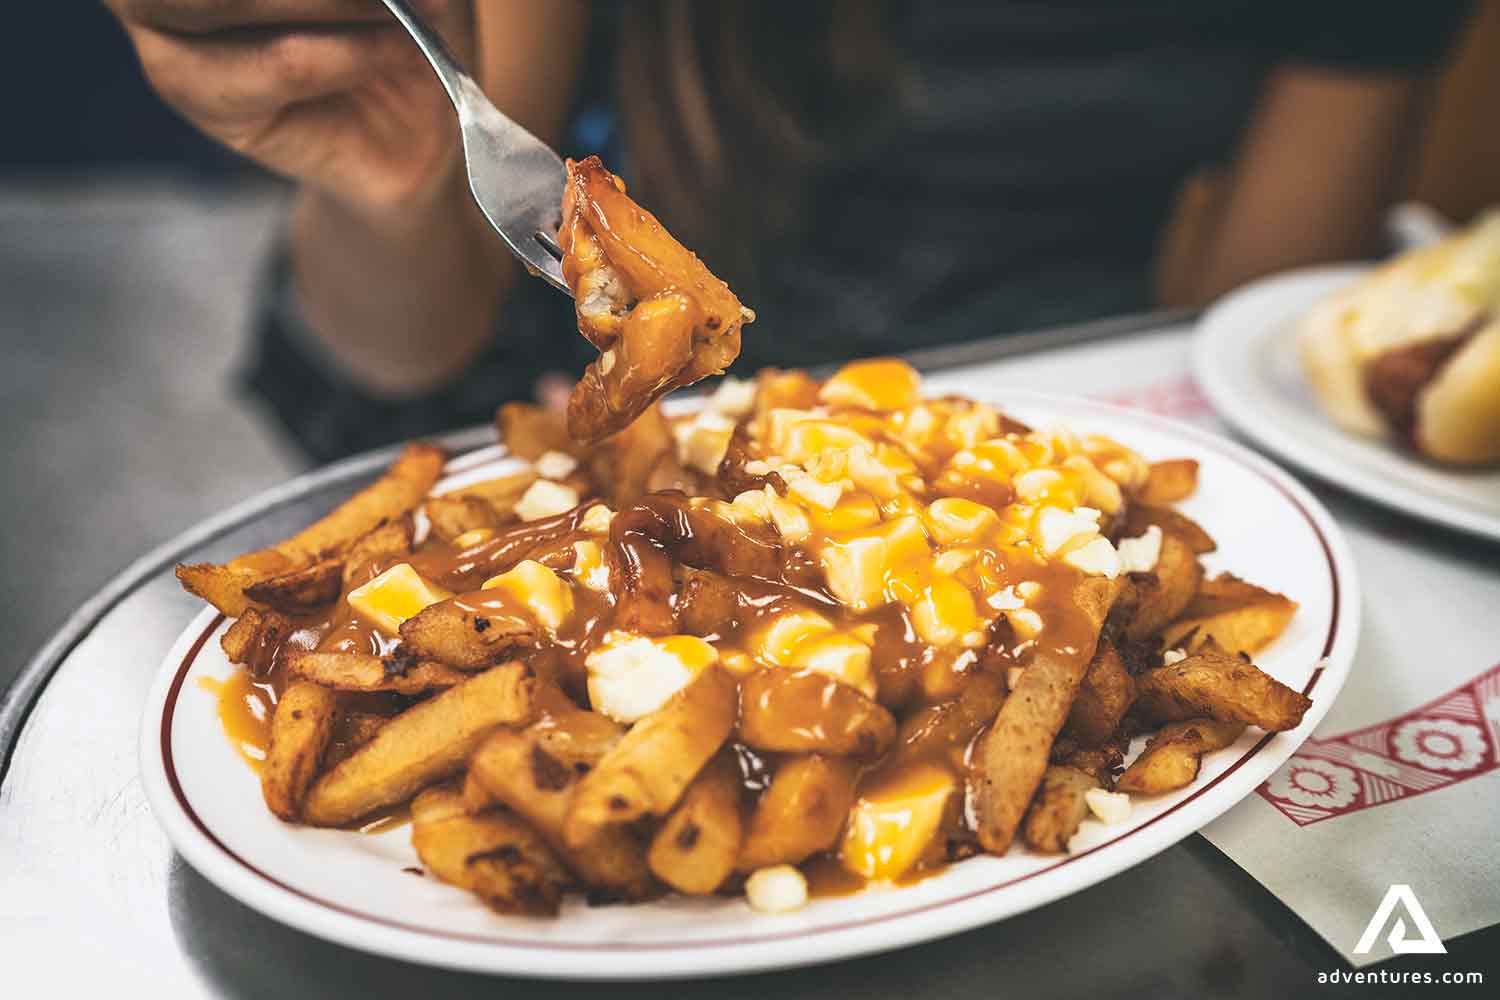 Iconic Canadian Foods You Must Make at Home